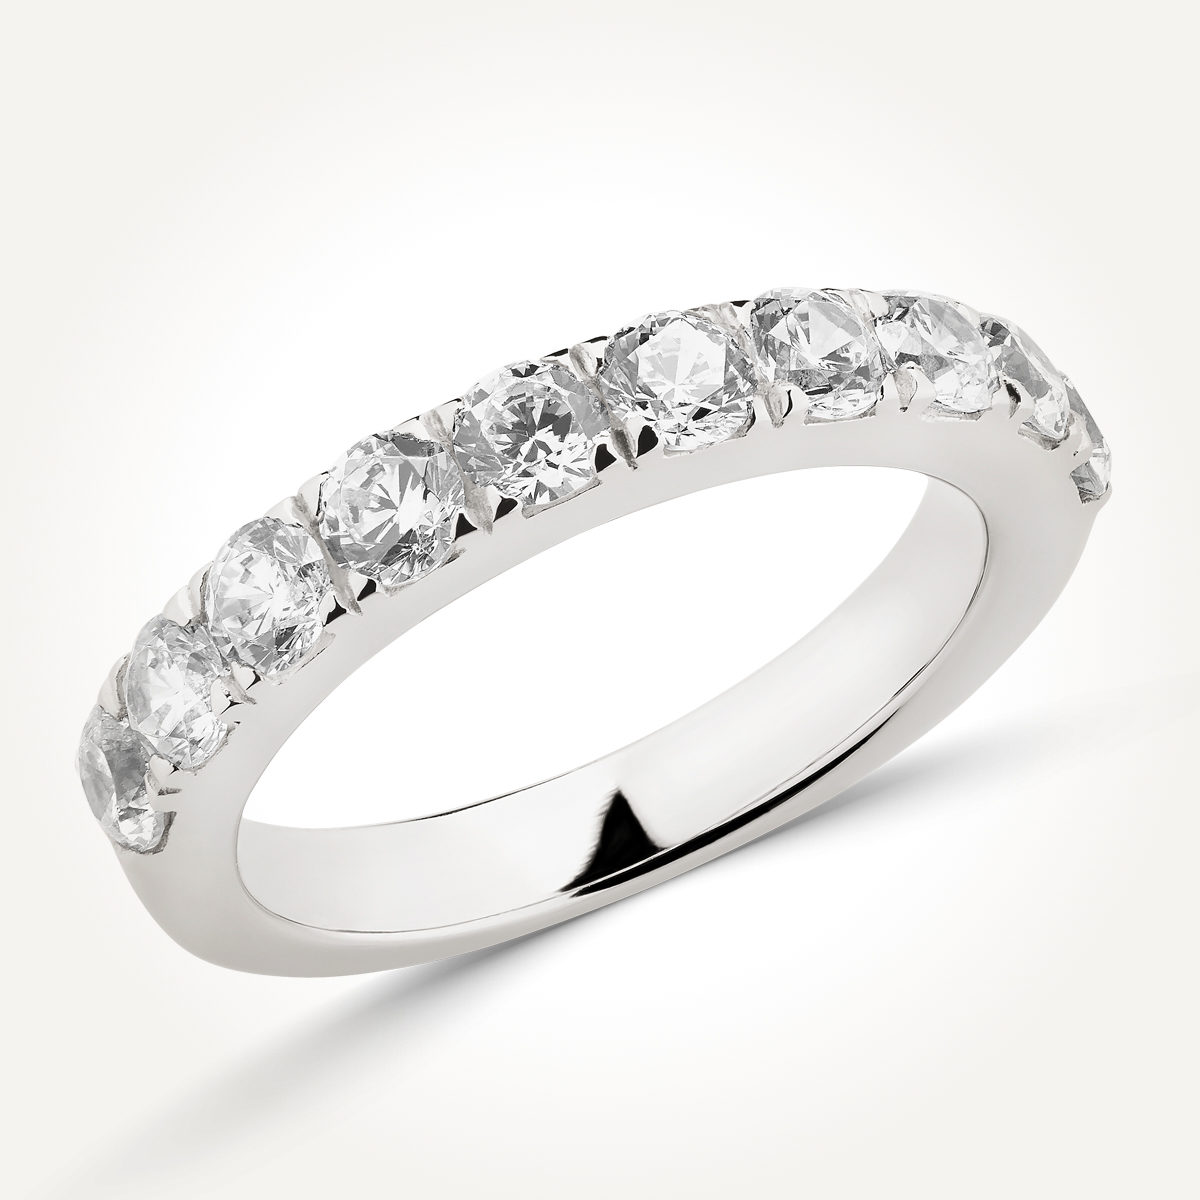 14KT White Gold Petite Pave Ring